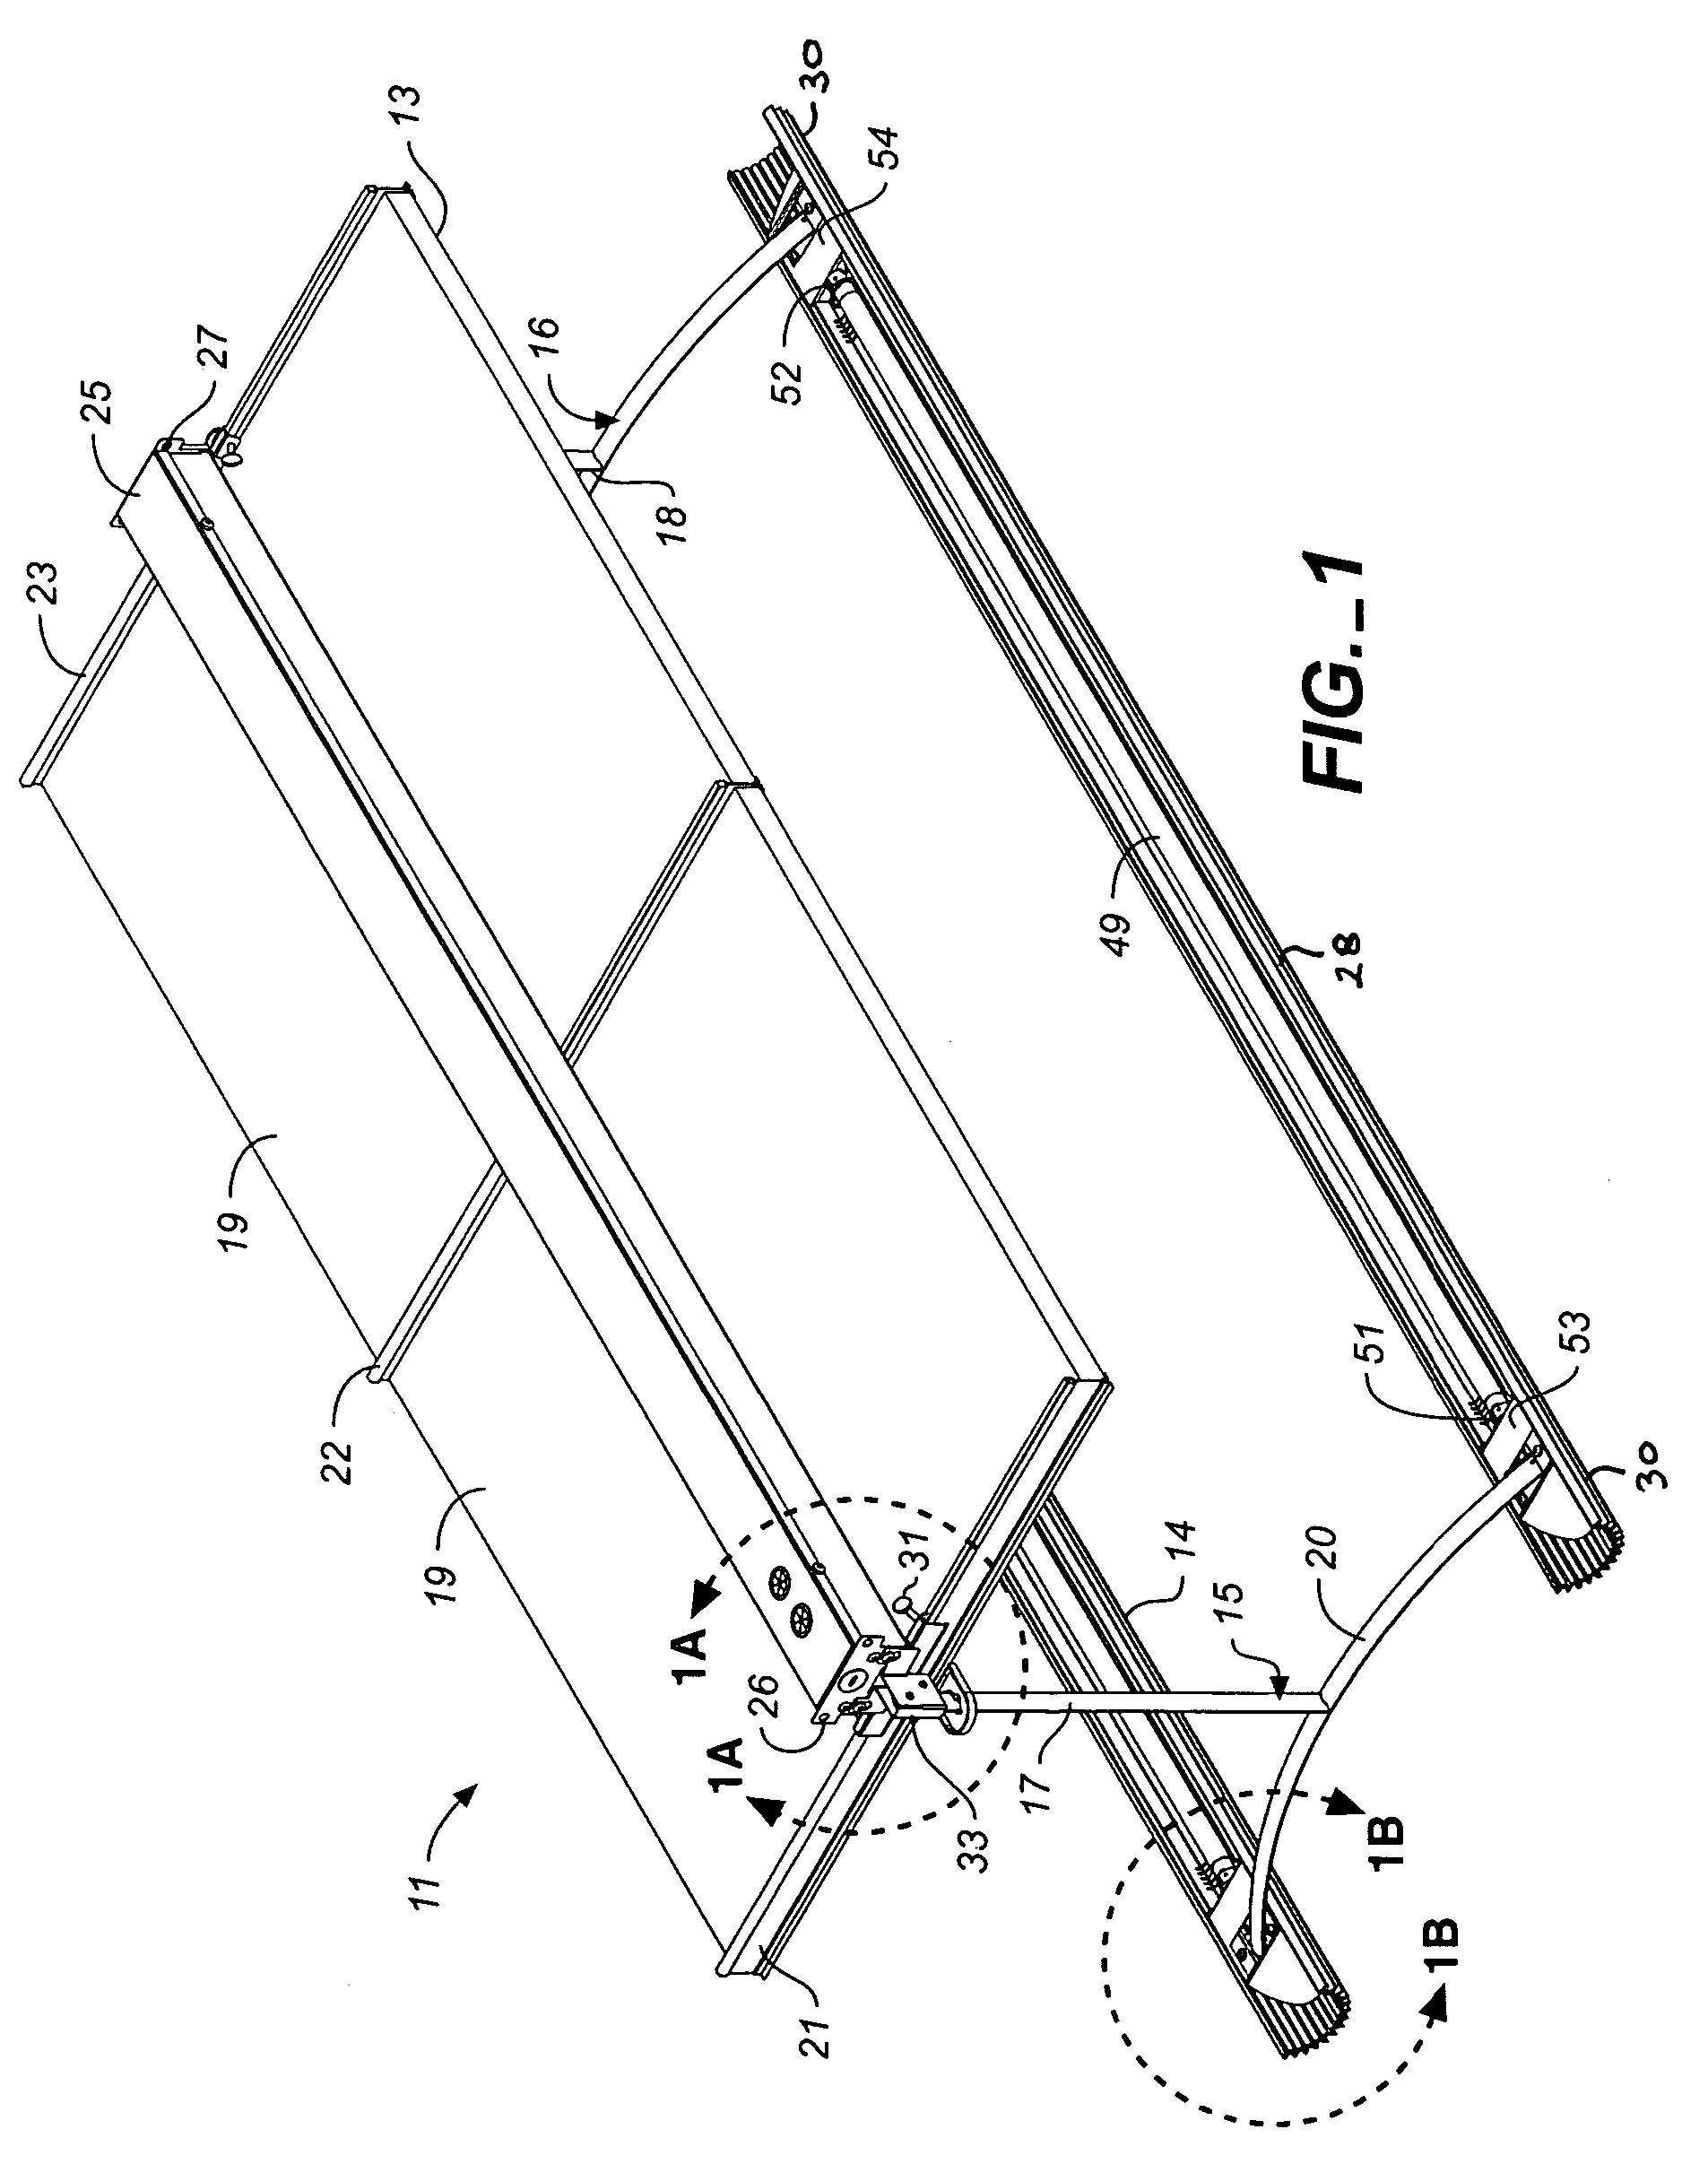 Fluorescent lighting fixture module for indirect lighting of interior spaces, and method